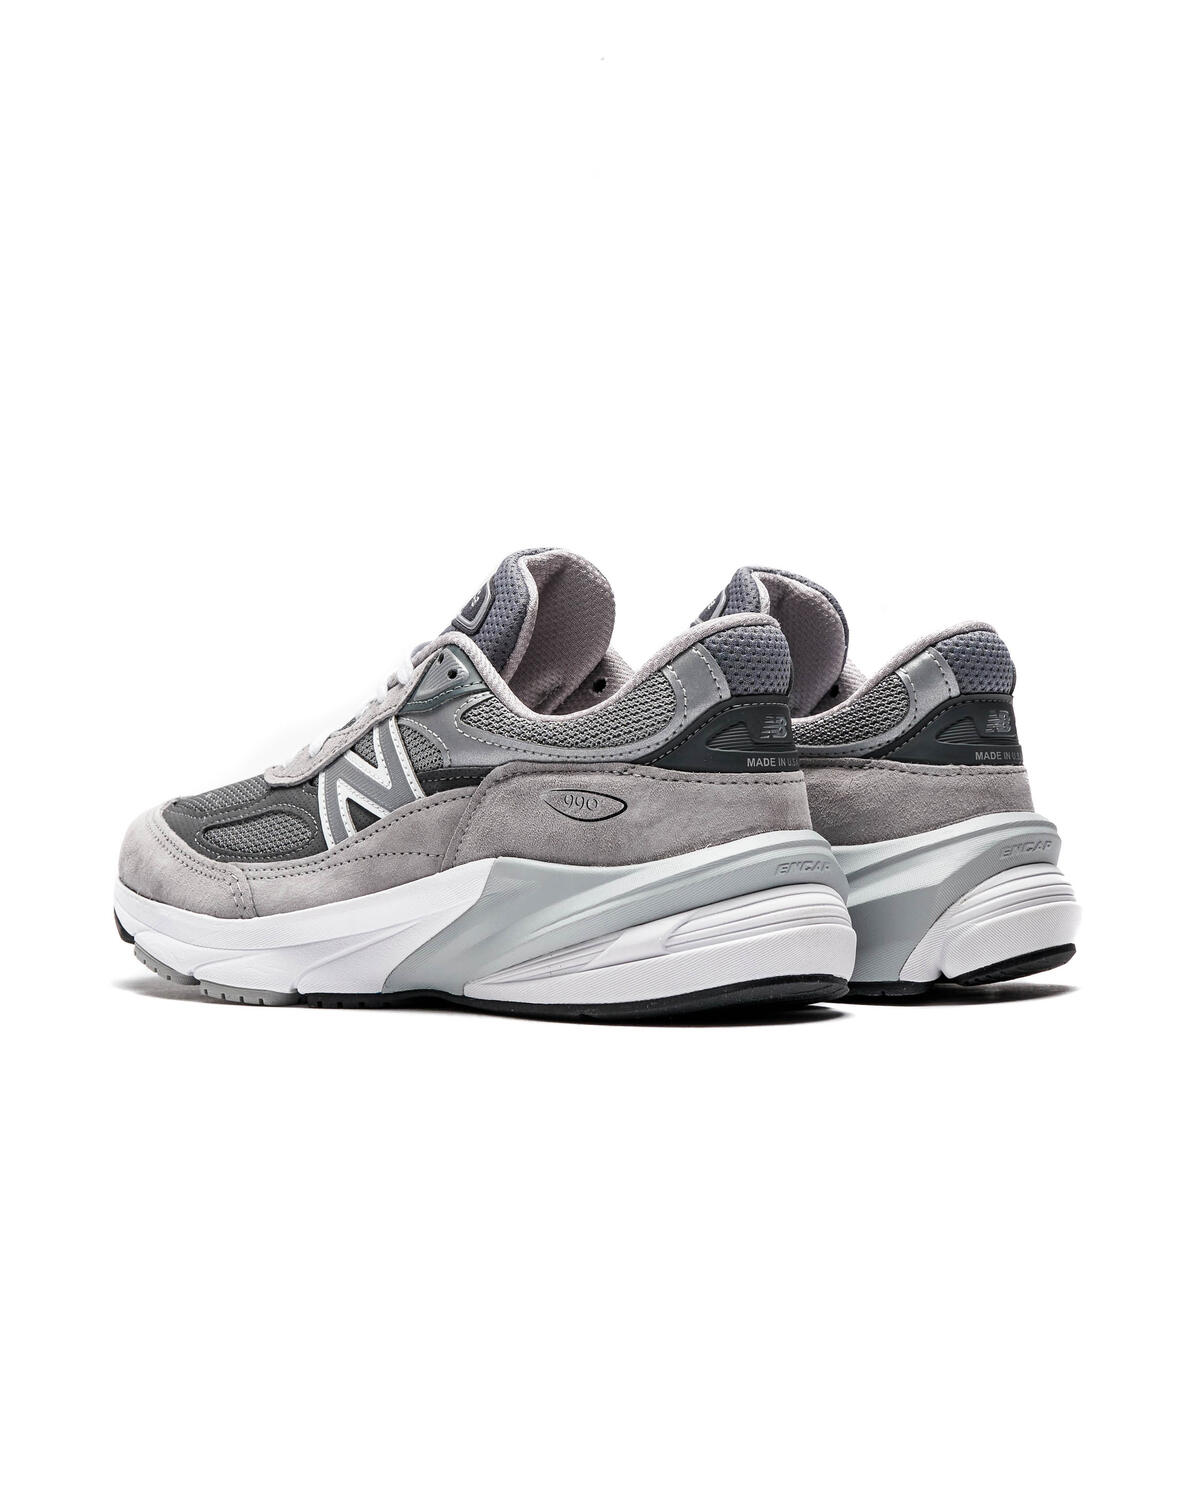 New Balance M 990 GL6 - Made in USA | M990GL6 | AFEW STORE